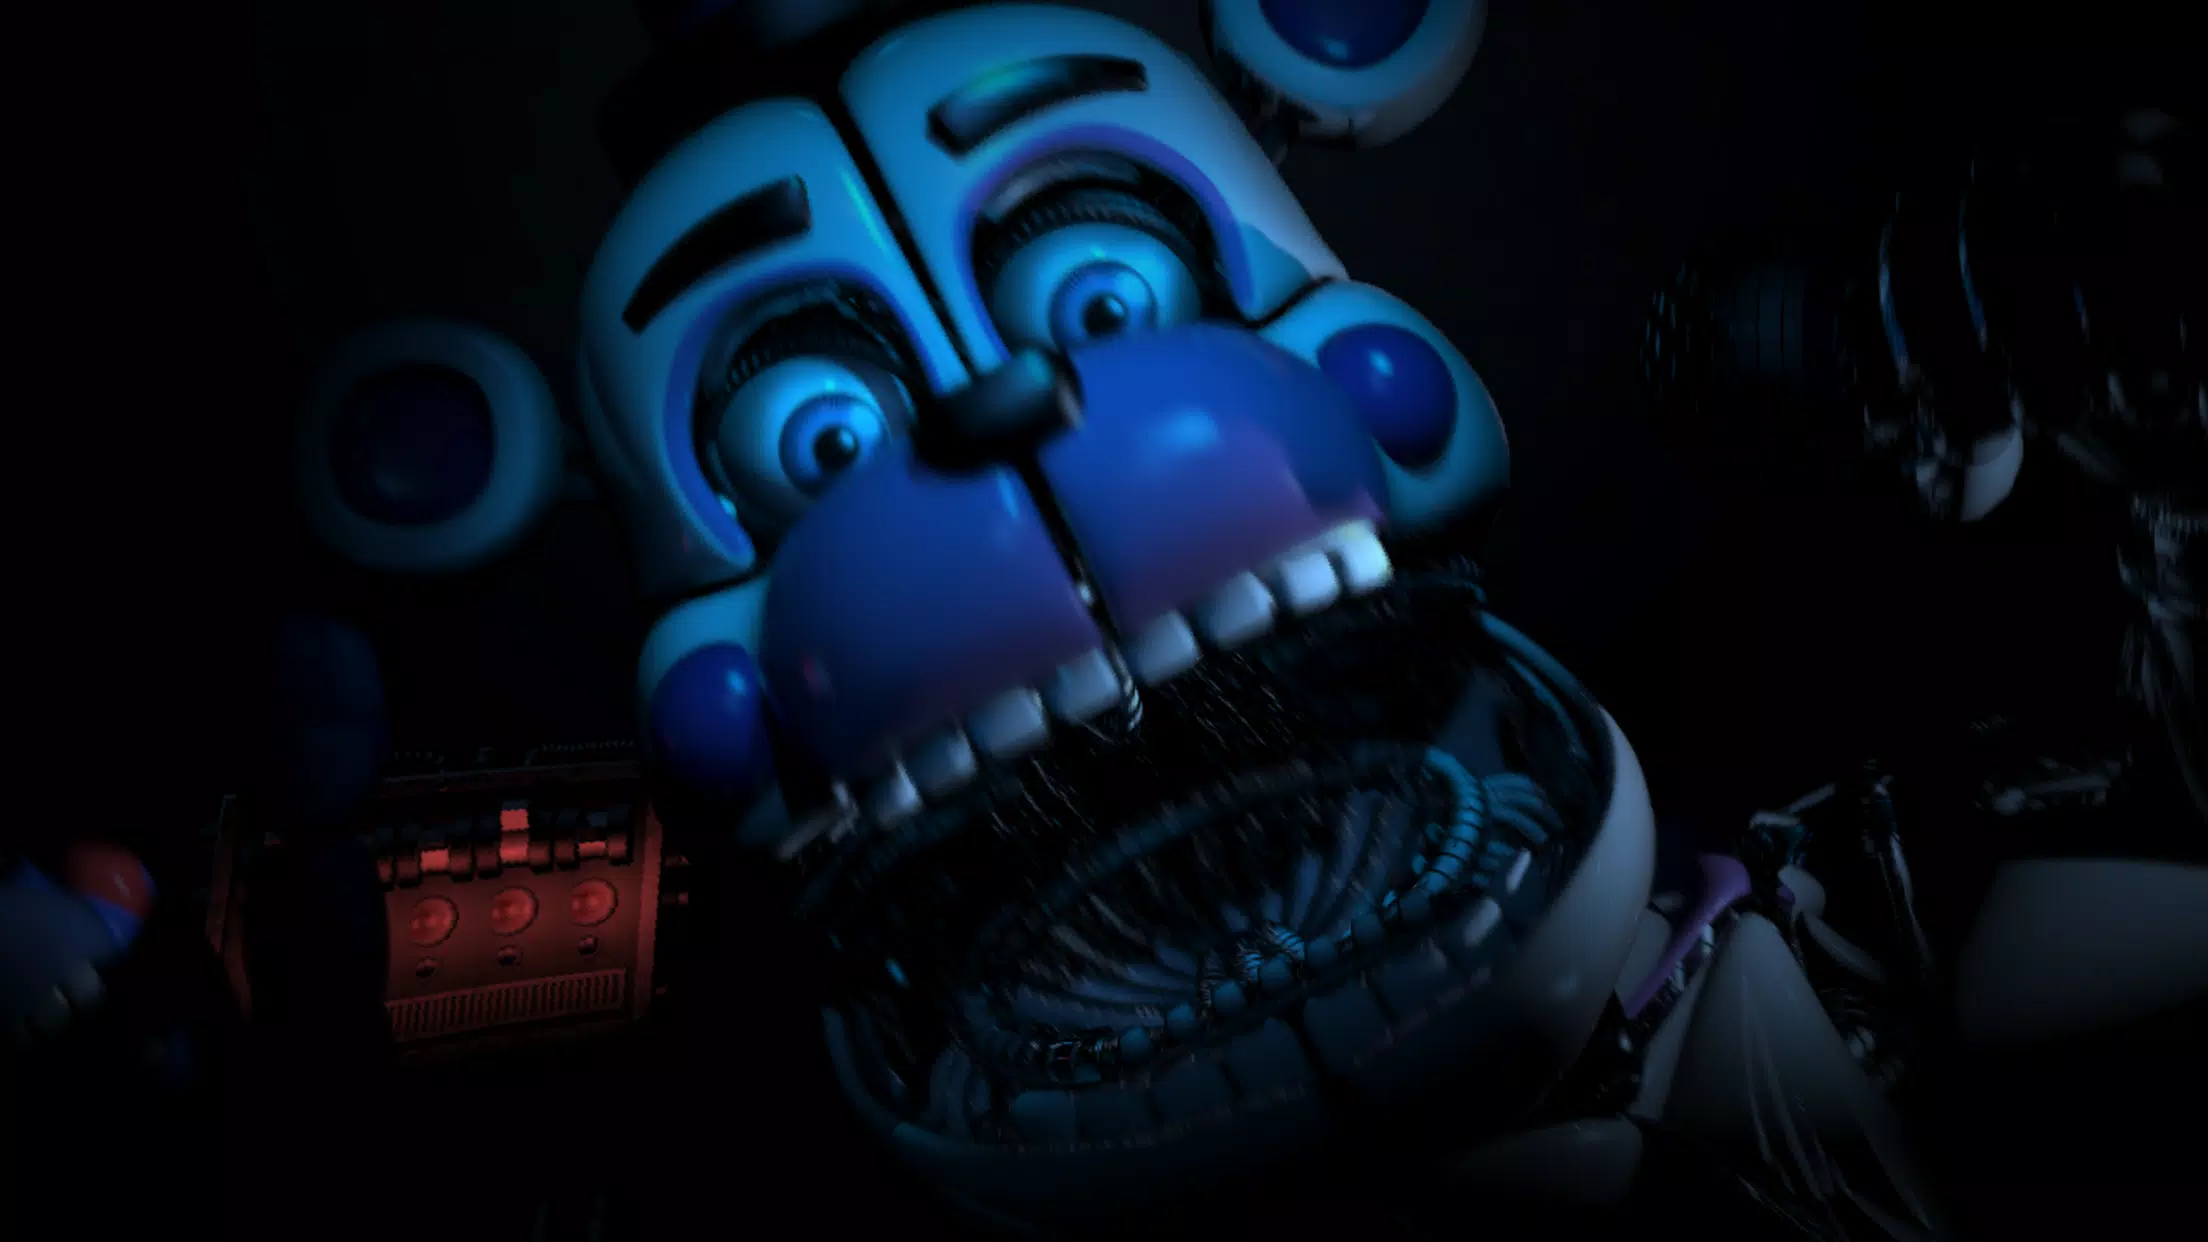 Download Five Nights at Freddy's 4 v2.0.2 APK on Android free